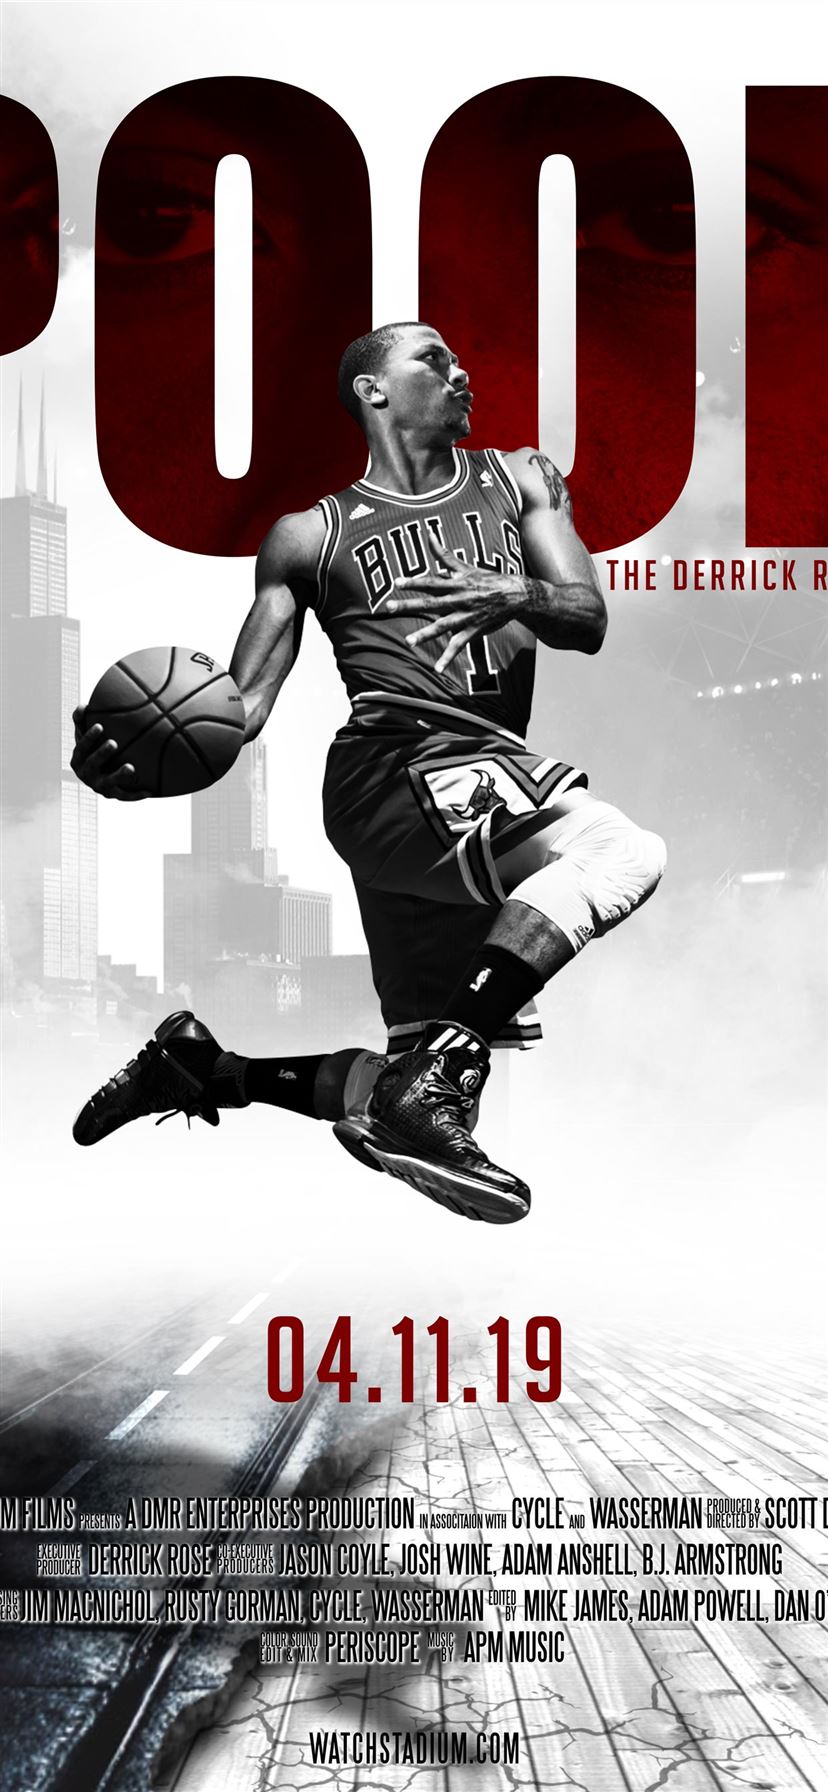 Pooh The Derrick Rose Story Photo Gallery iPhone